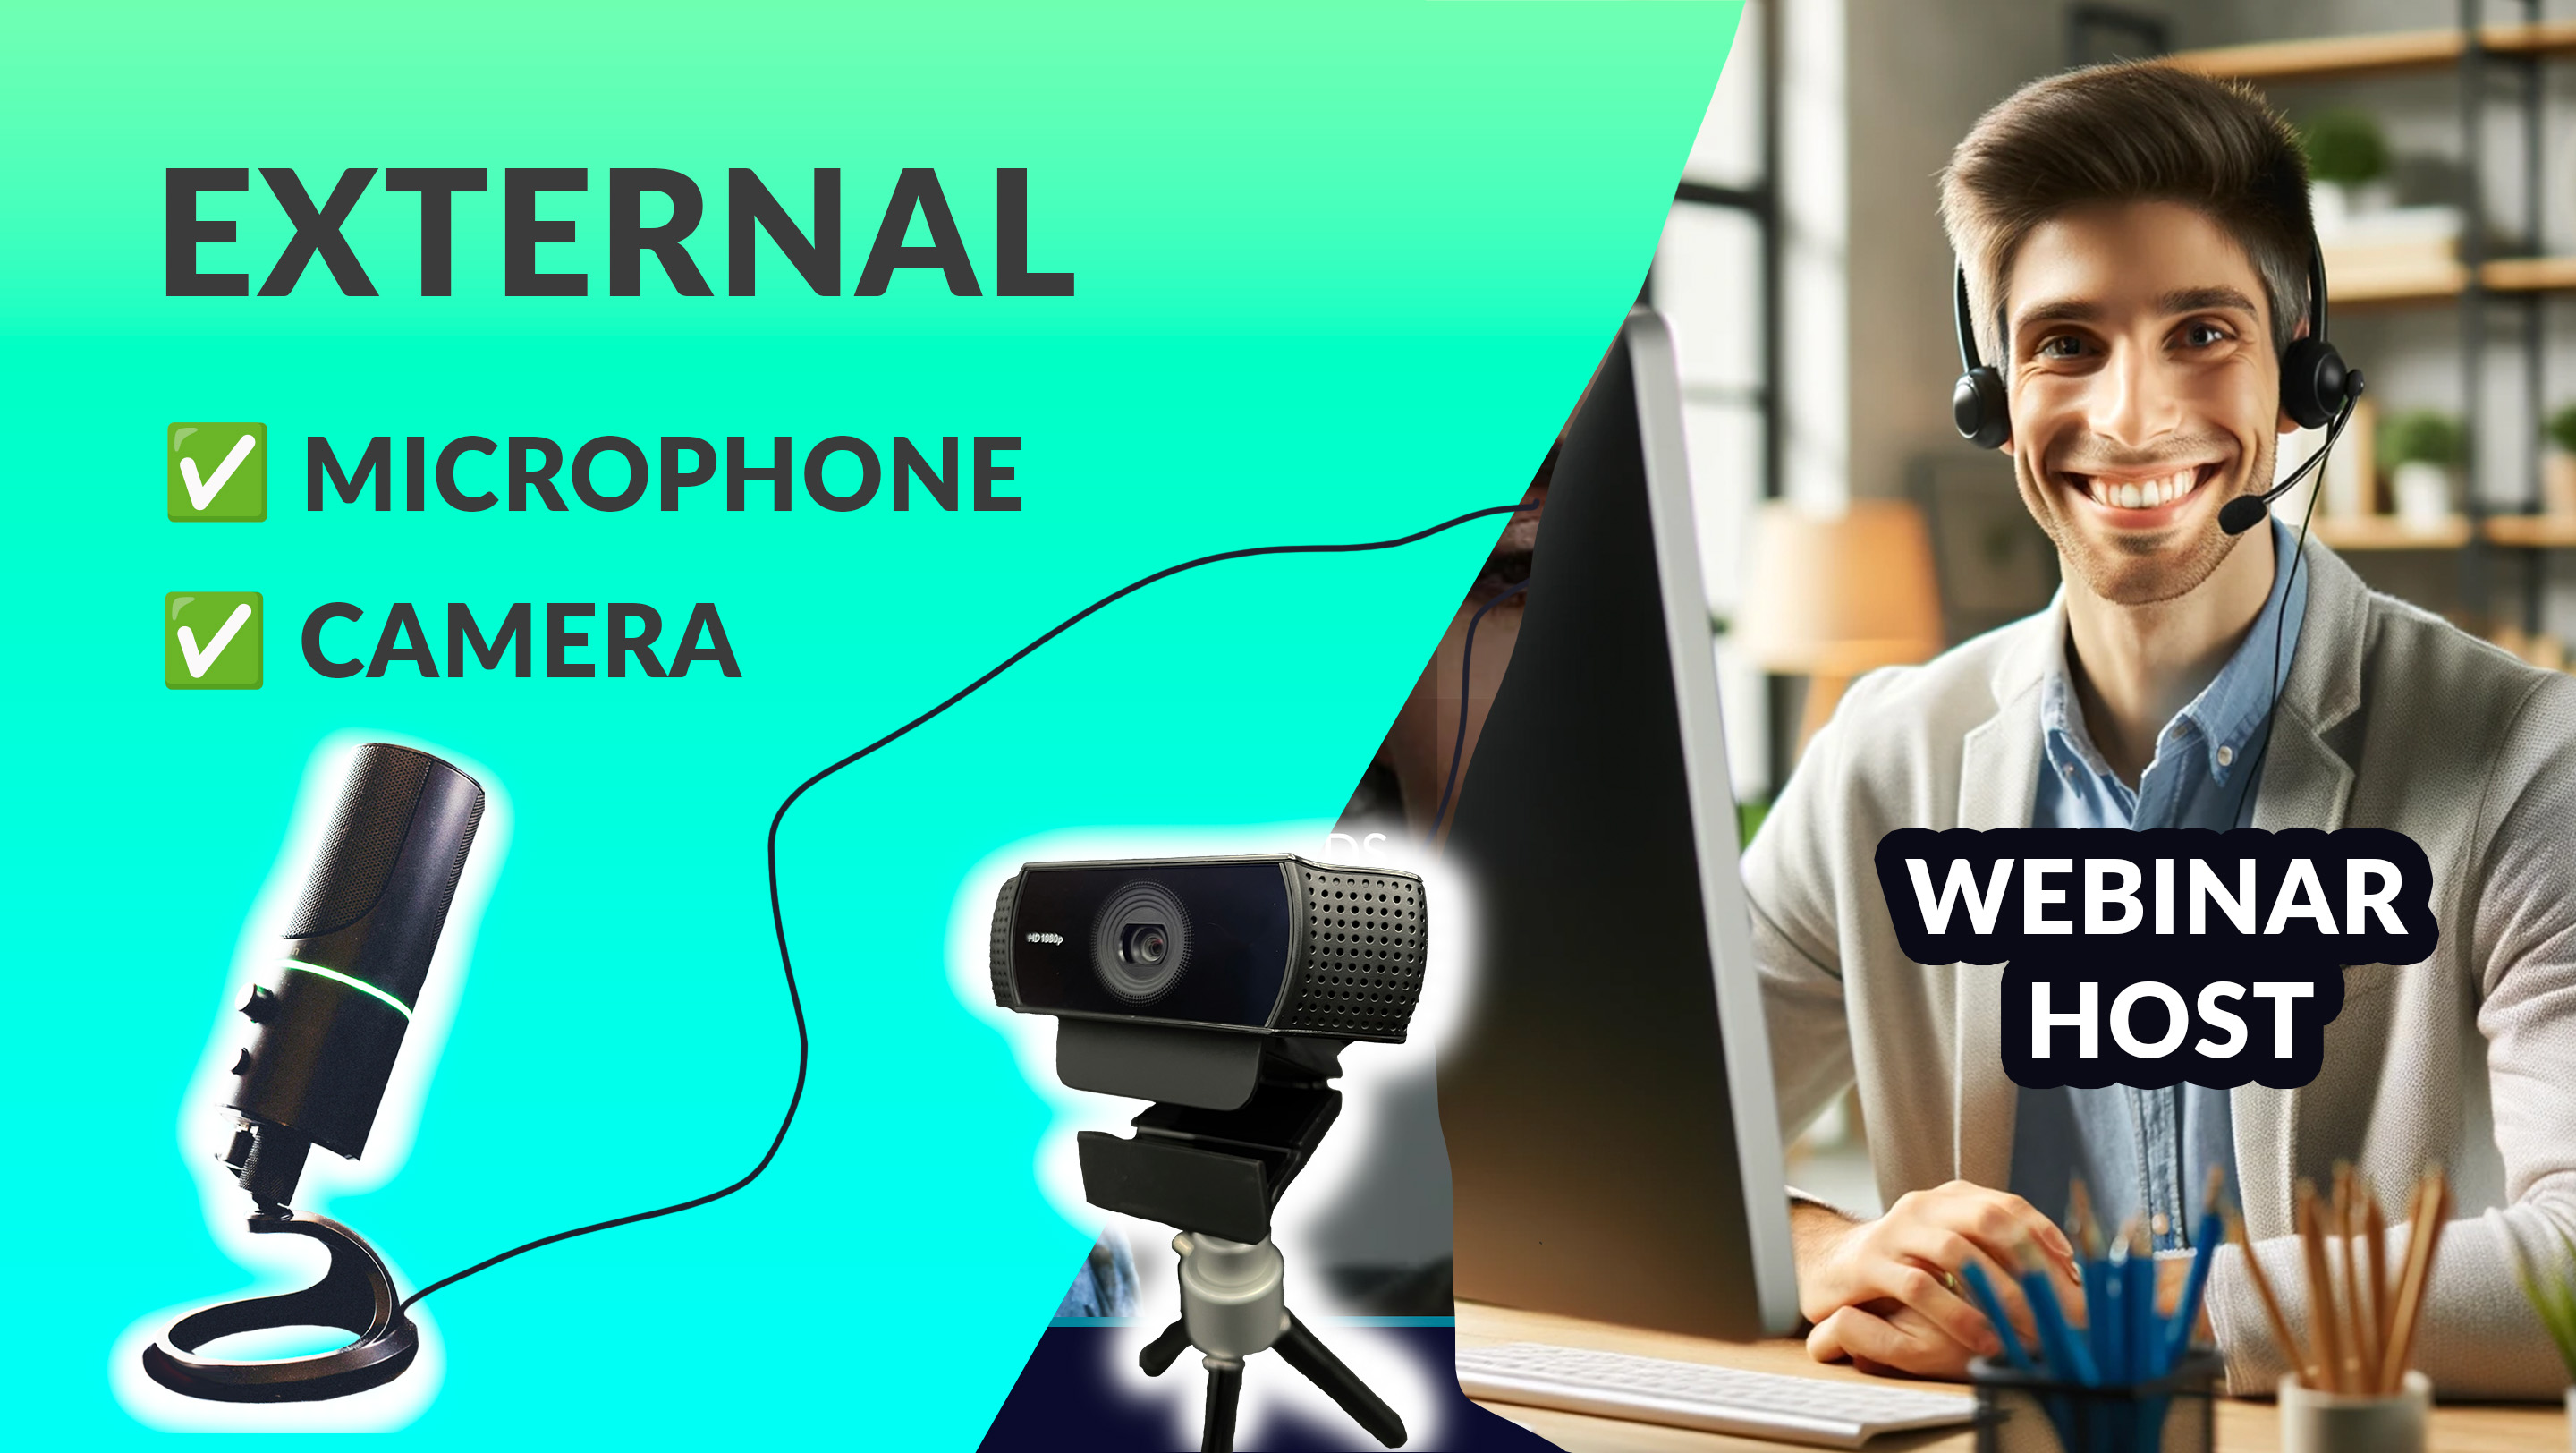 Here is how to use an external video camera and mic in a webinar.